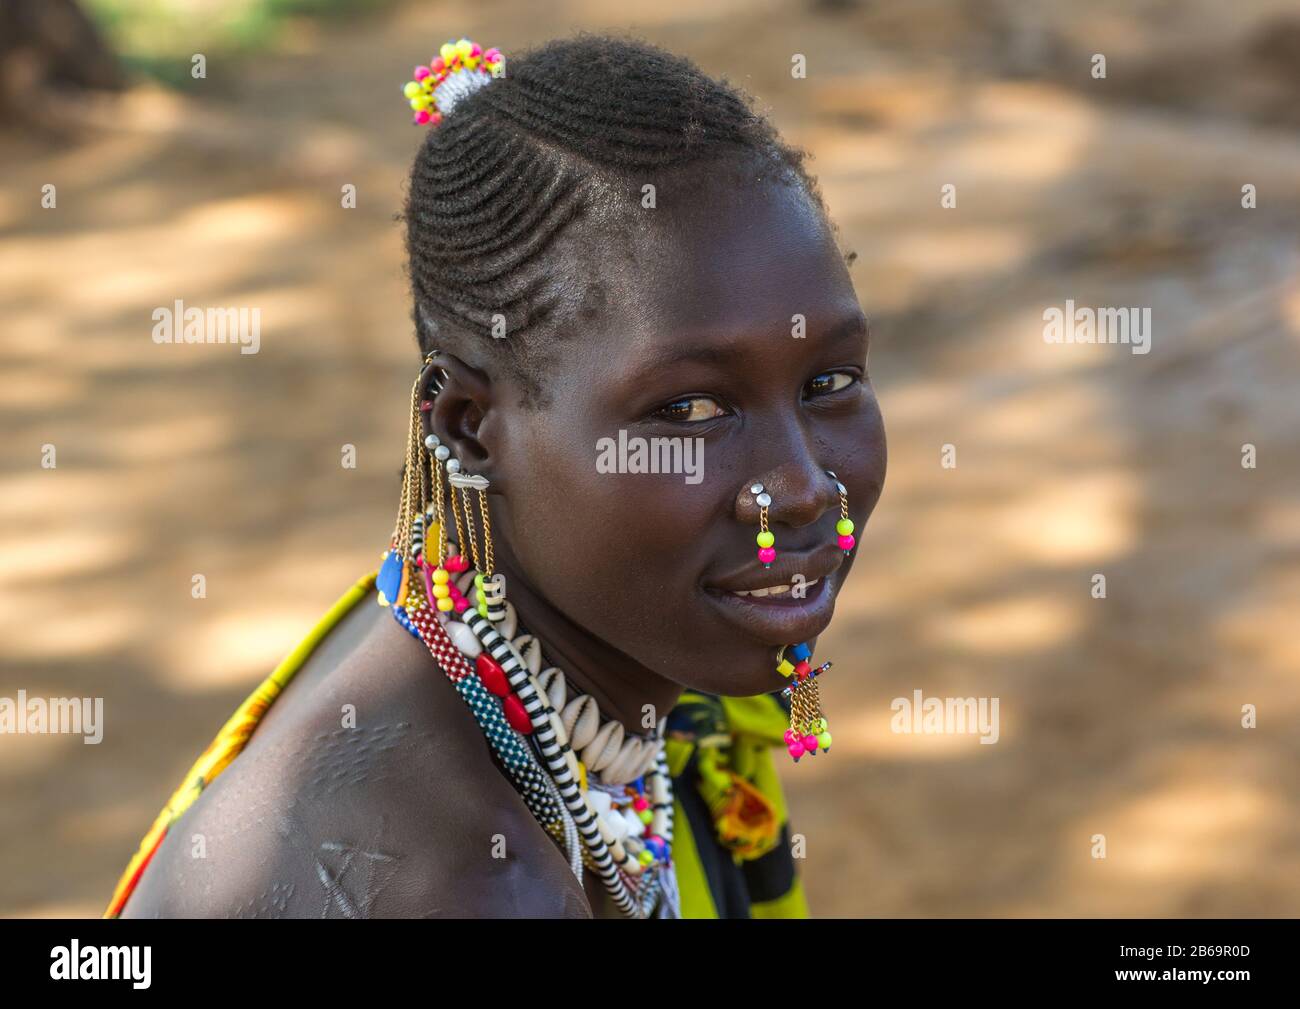 Portrait of a Larim tribe woman with traditional eaerrings and Nose earrings, Boya Mountains, Imatong, South Sudan Stock Photo